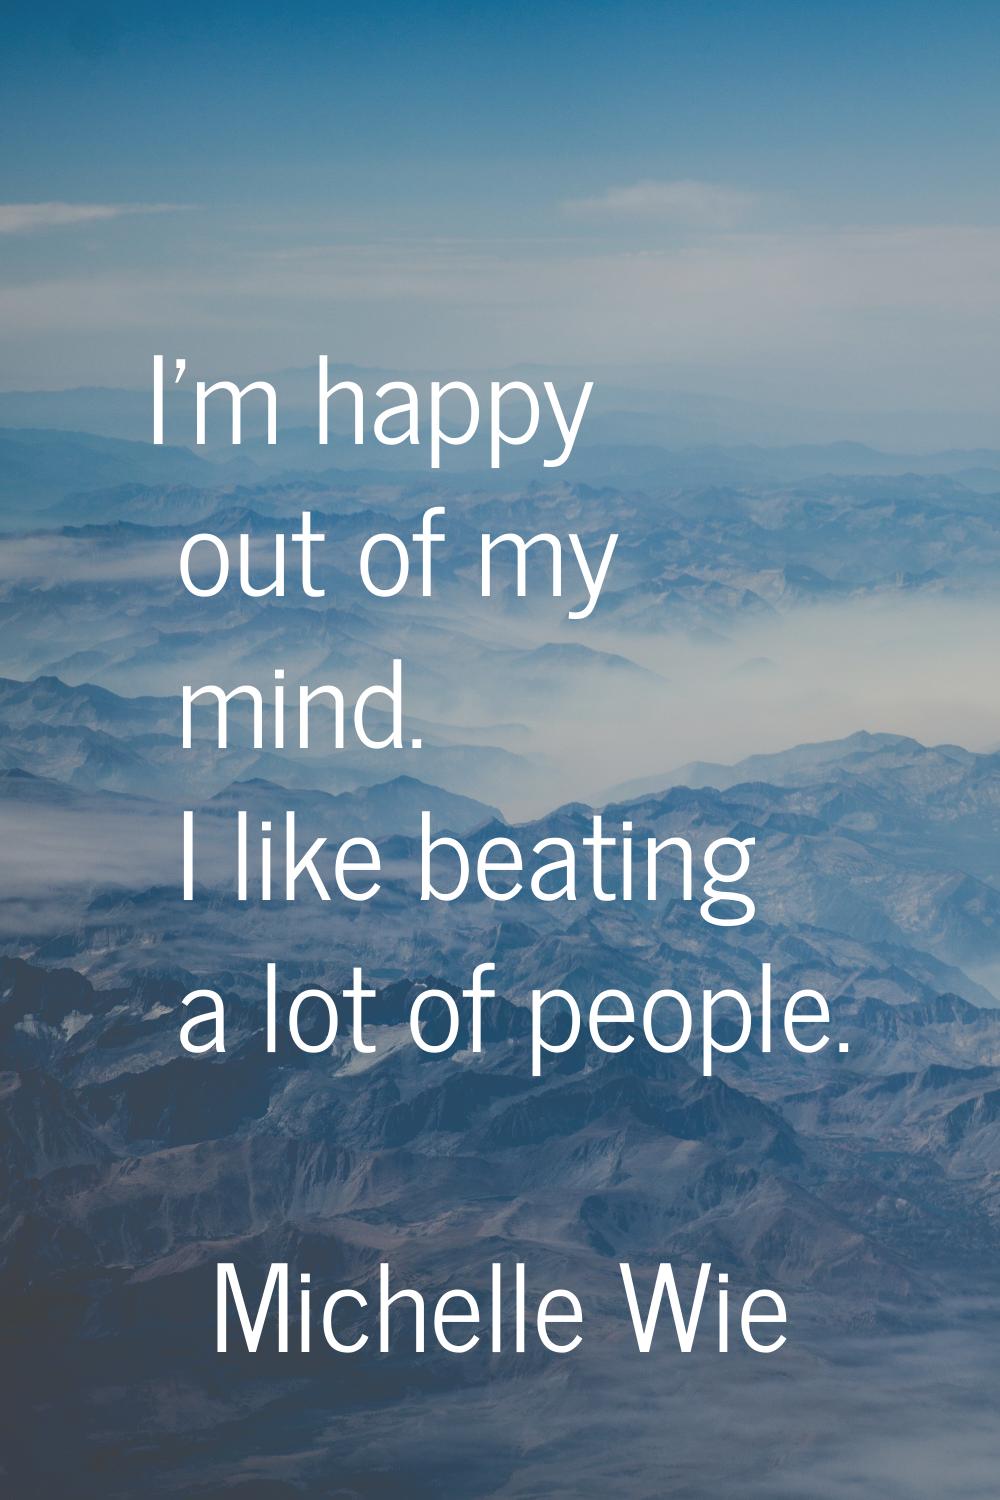 I'm happy out of my mind. I like beating a lot of people.